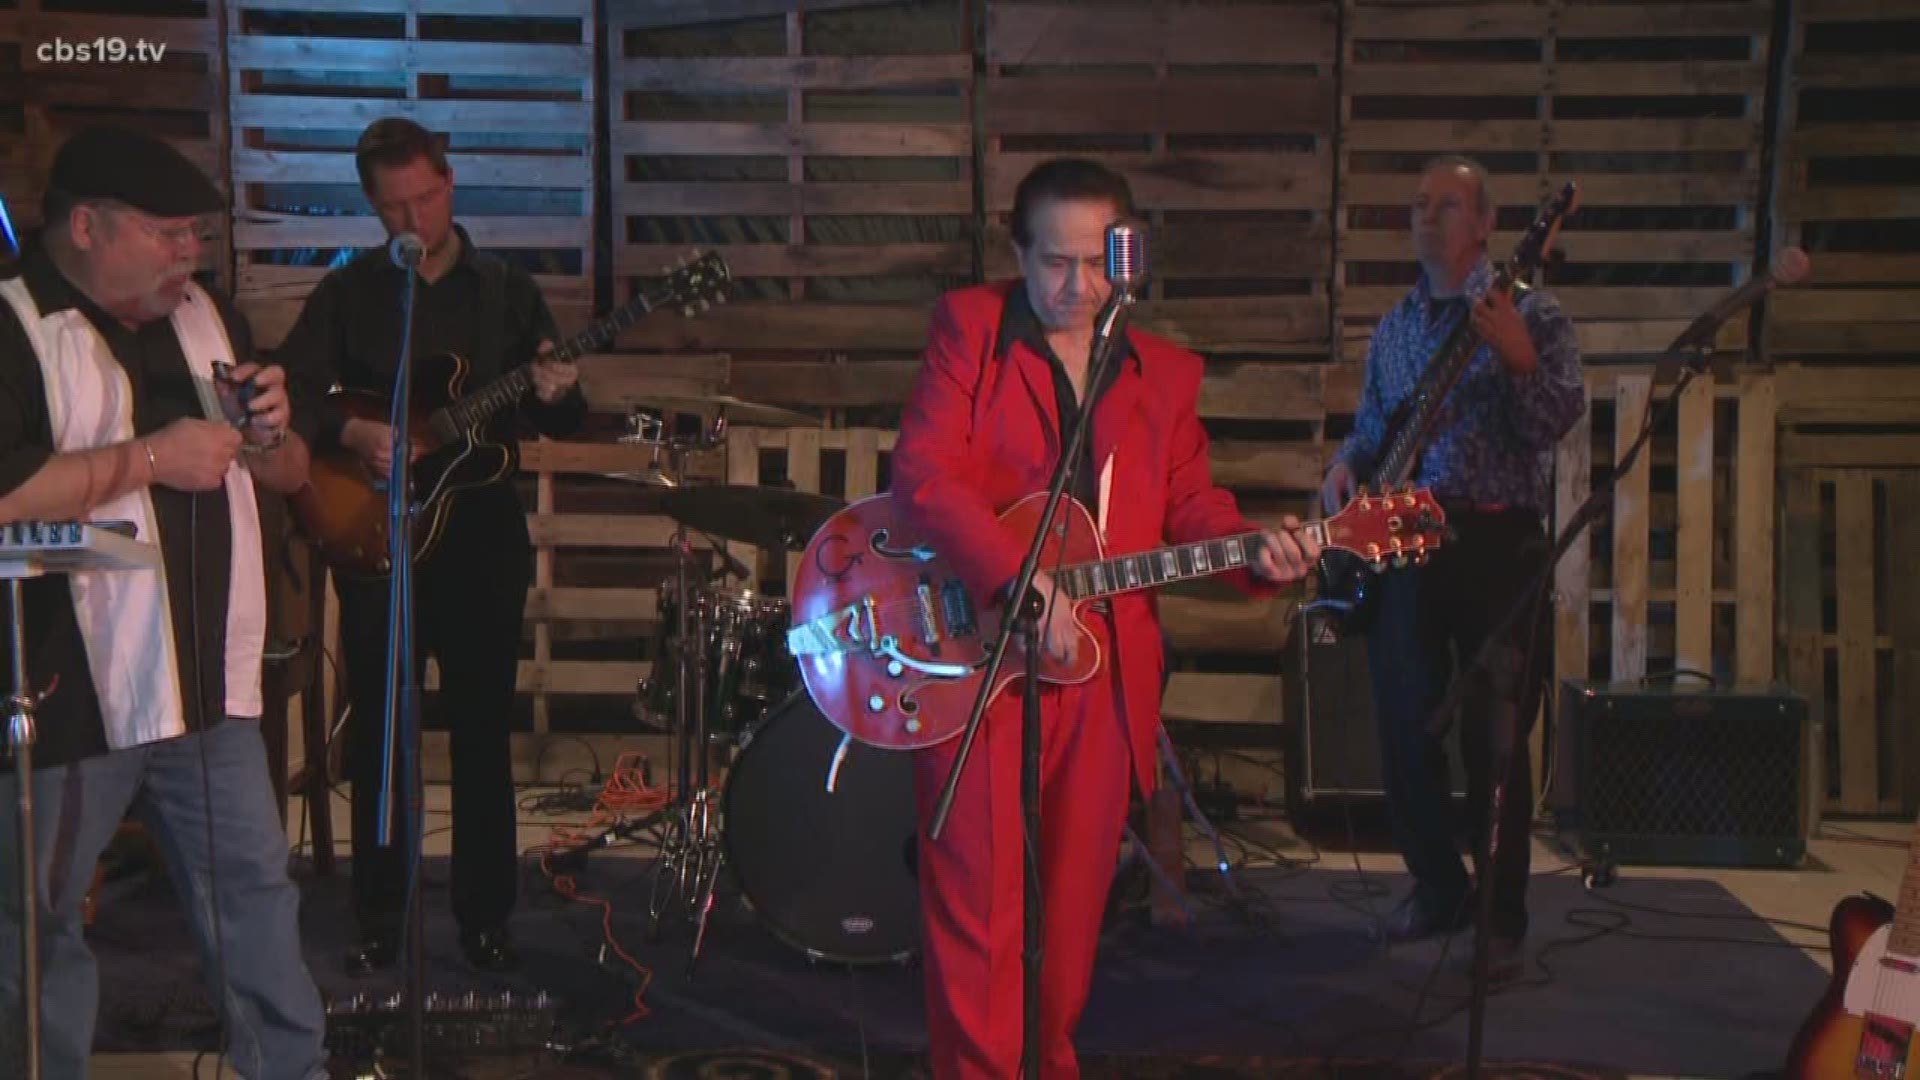 King Richard performs new song on KYTX CBS19.